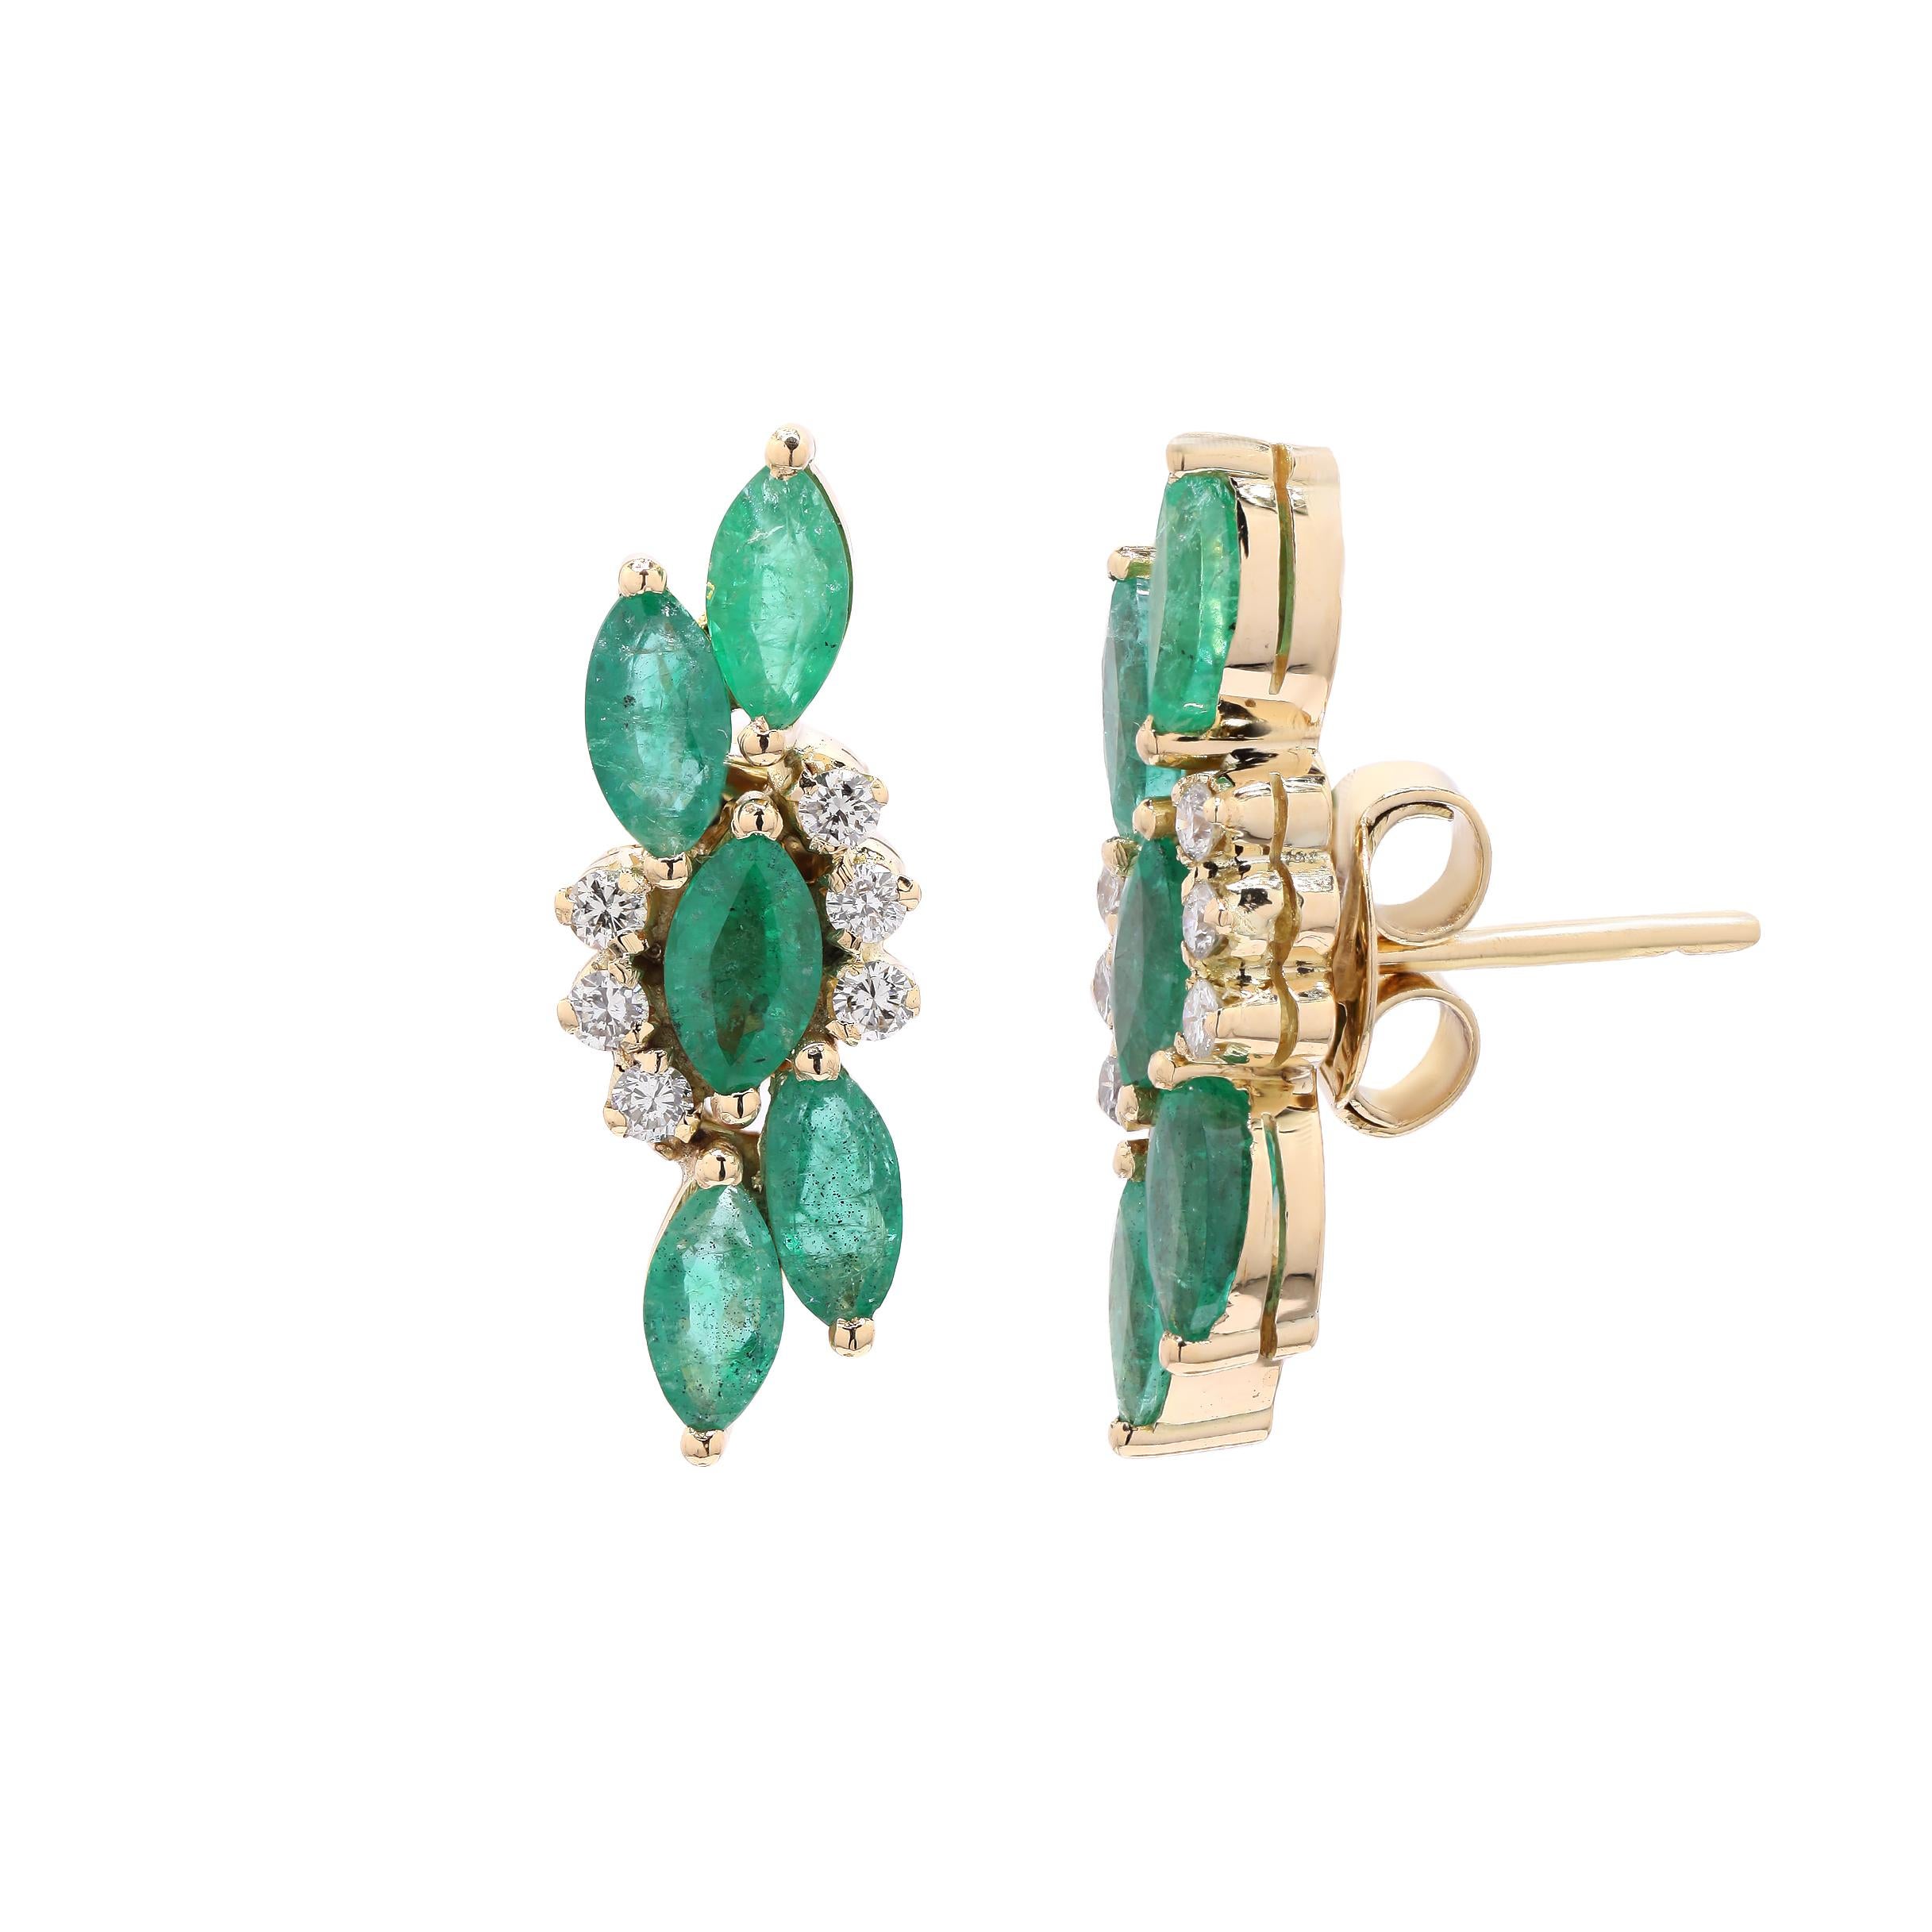 Earrings create a subtle beauty while showcasing the colors of the natural precious gemstones and illuminating diamonds making a statement.
Marquise cut Emerald and Diamond Push back Stud earrings in 18K gold. Embrace your look with these stunning